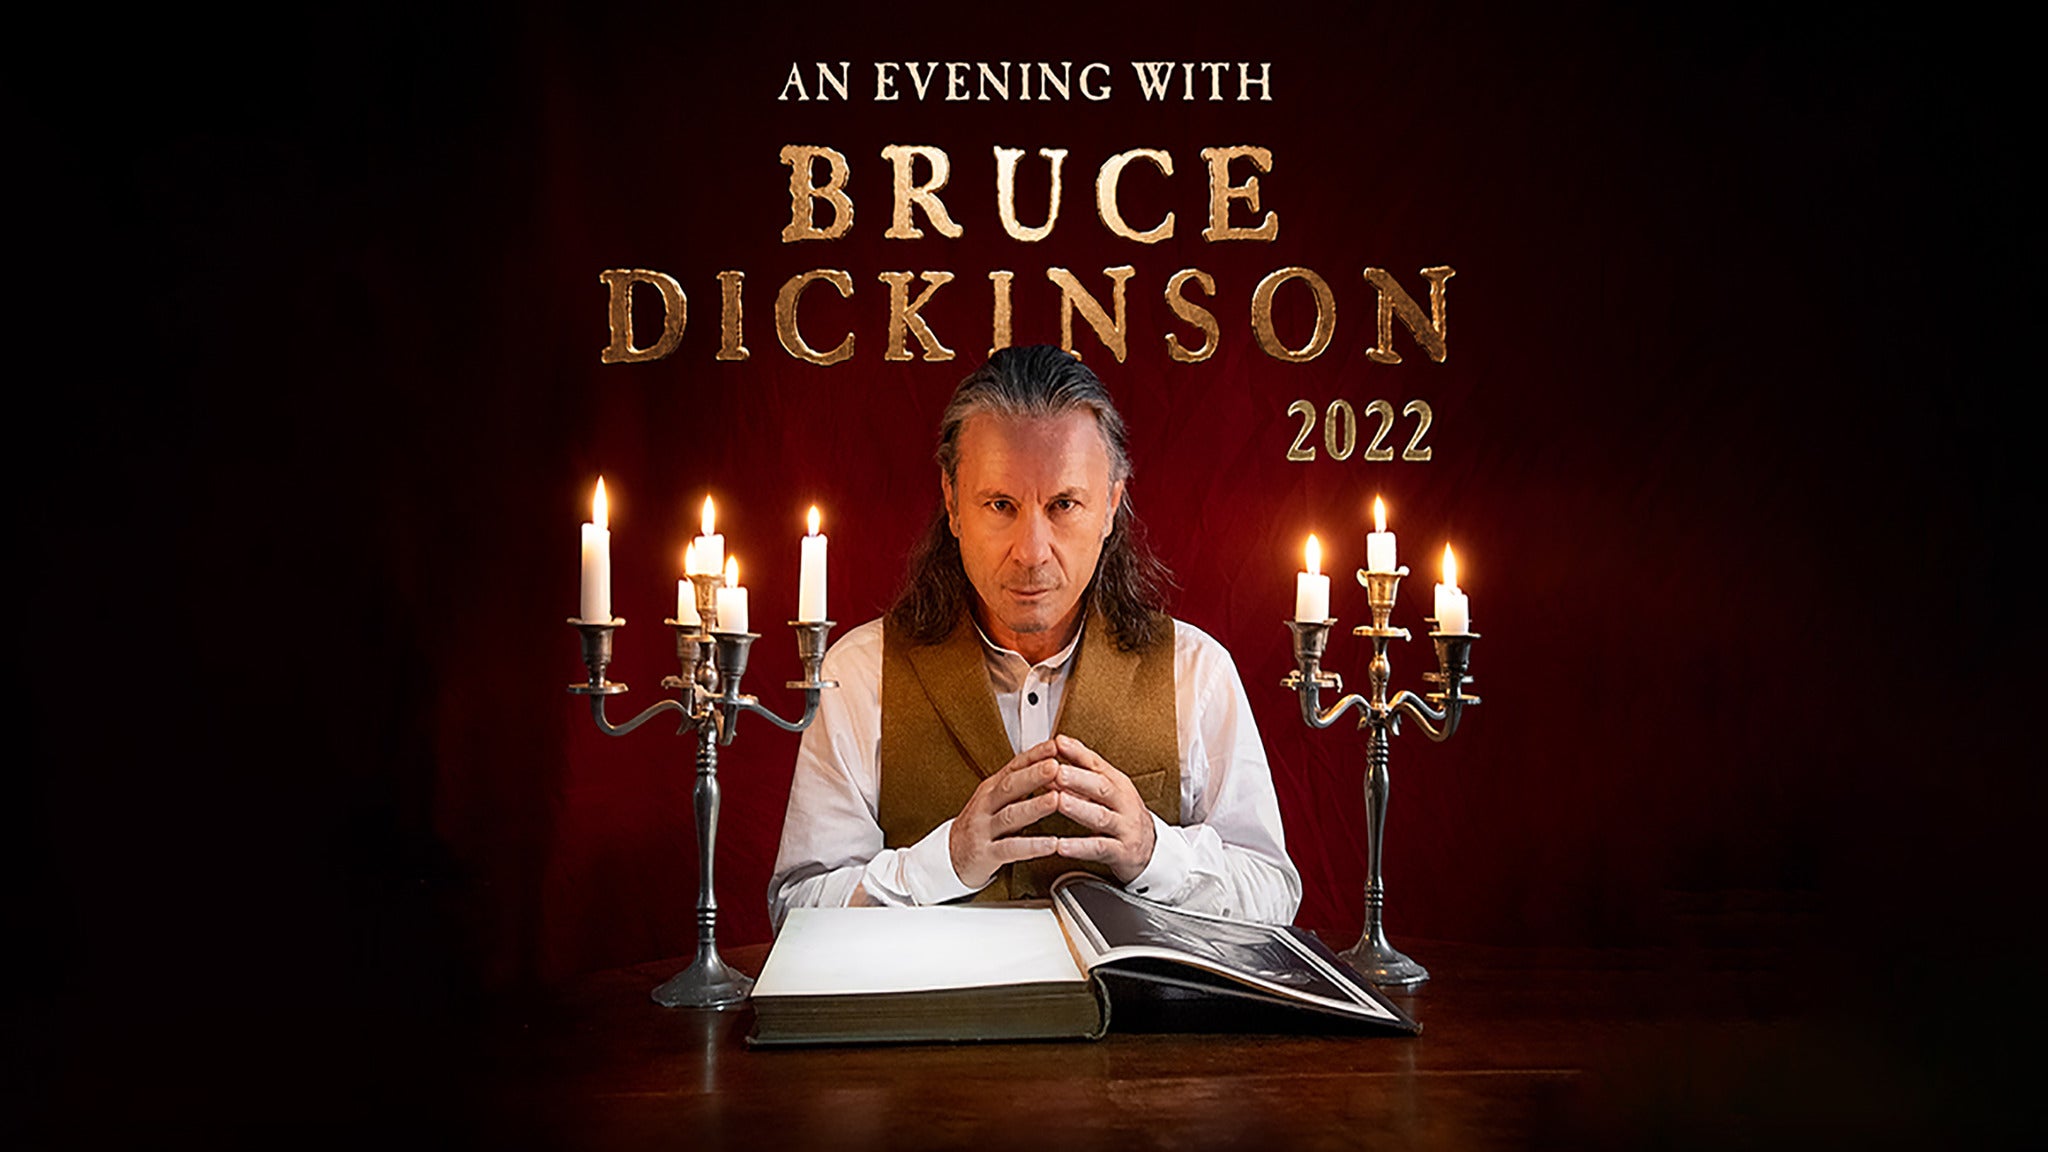 107.9 KBPI Presents: An Evening With Bruce Dickinson pre-sale code for early tickets in Denver